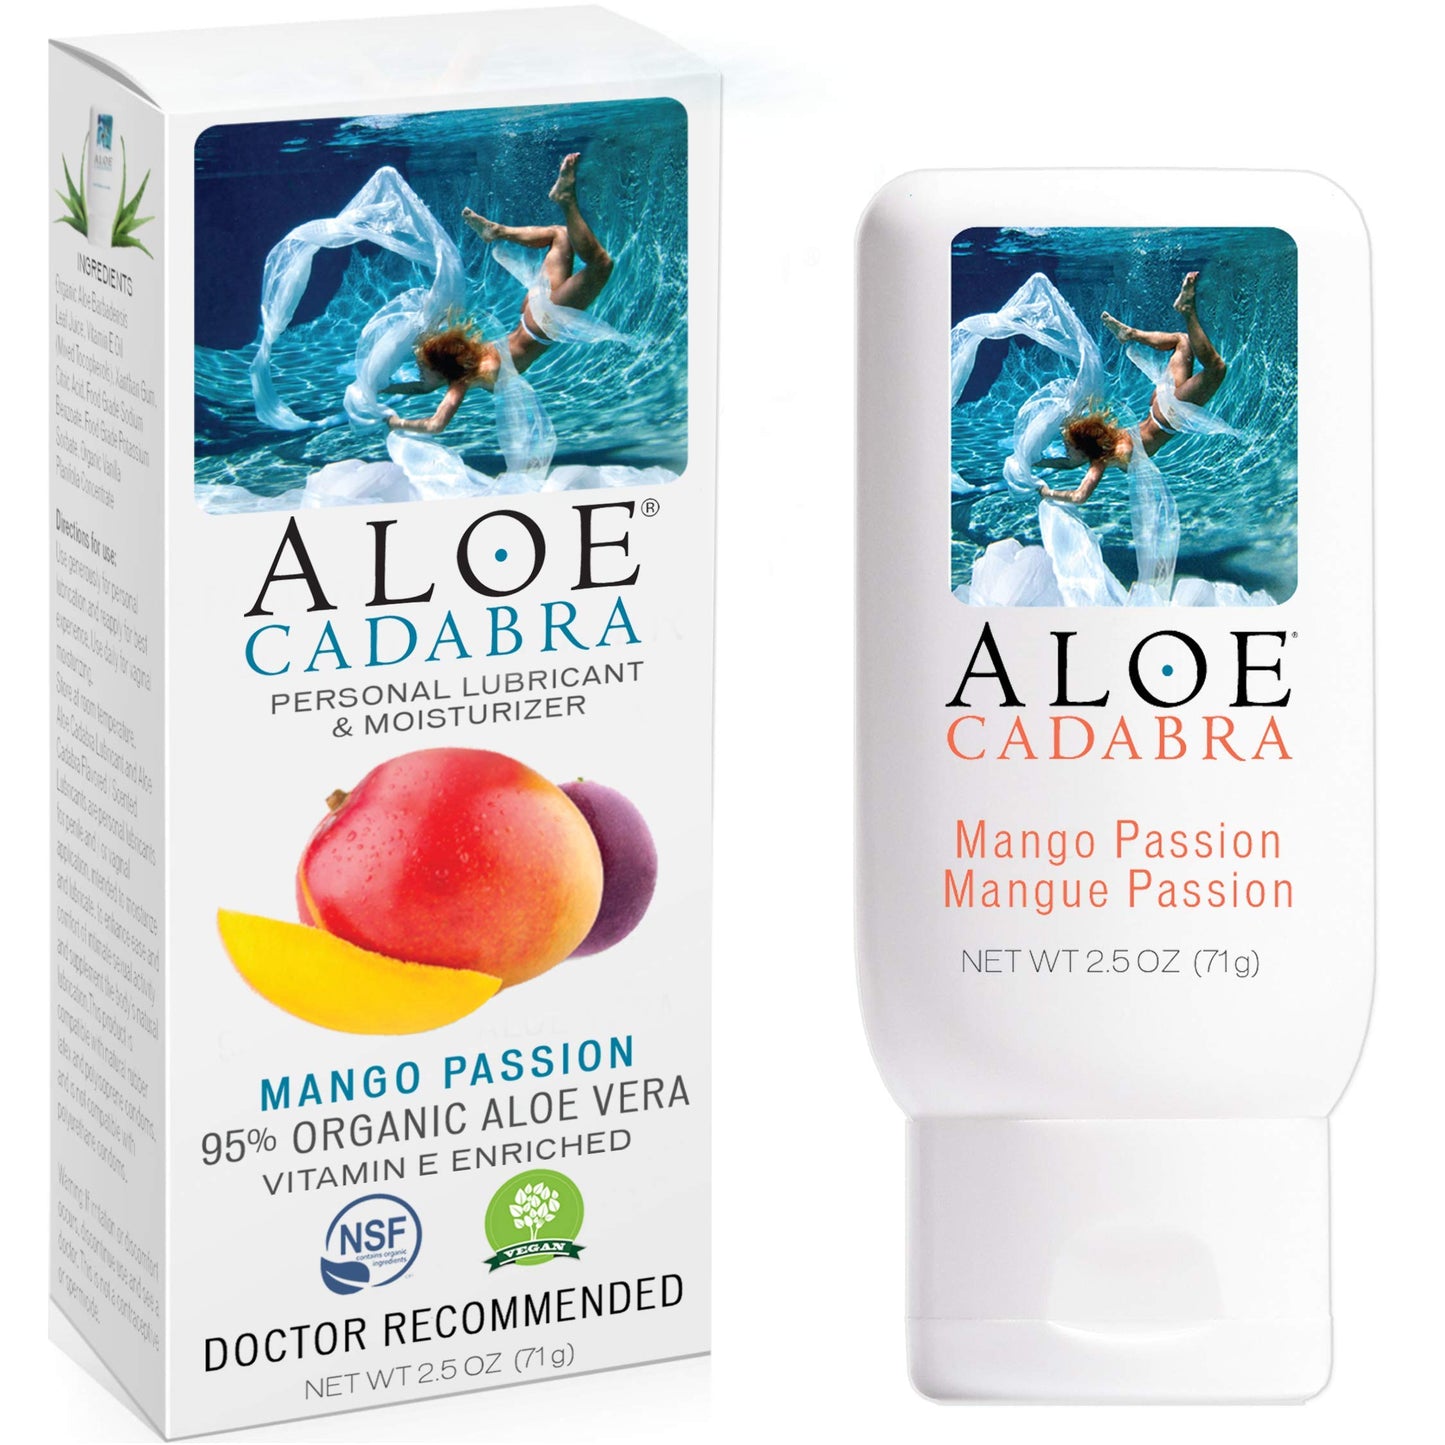 Flavored Personal Lubricant Organic, Natural Mango Passion Lube, Oral, Women, Men & Couples, 2.5 Ounce Aloe Cadabra